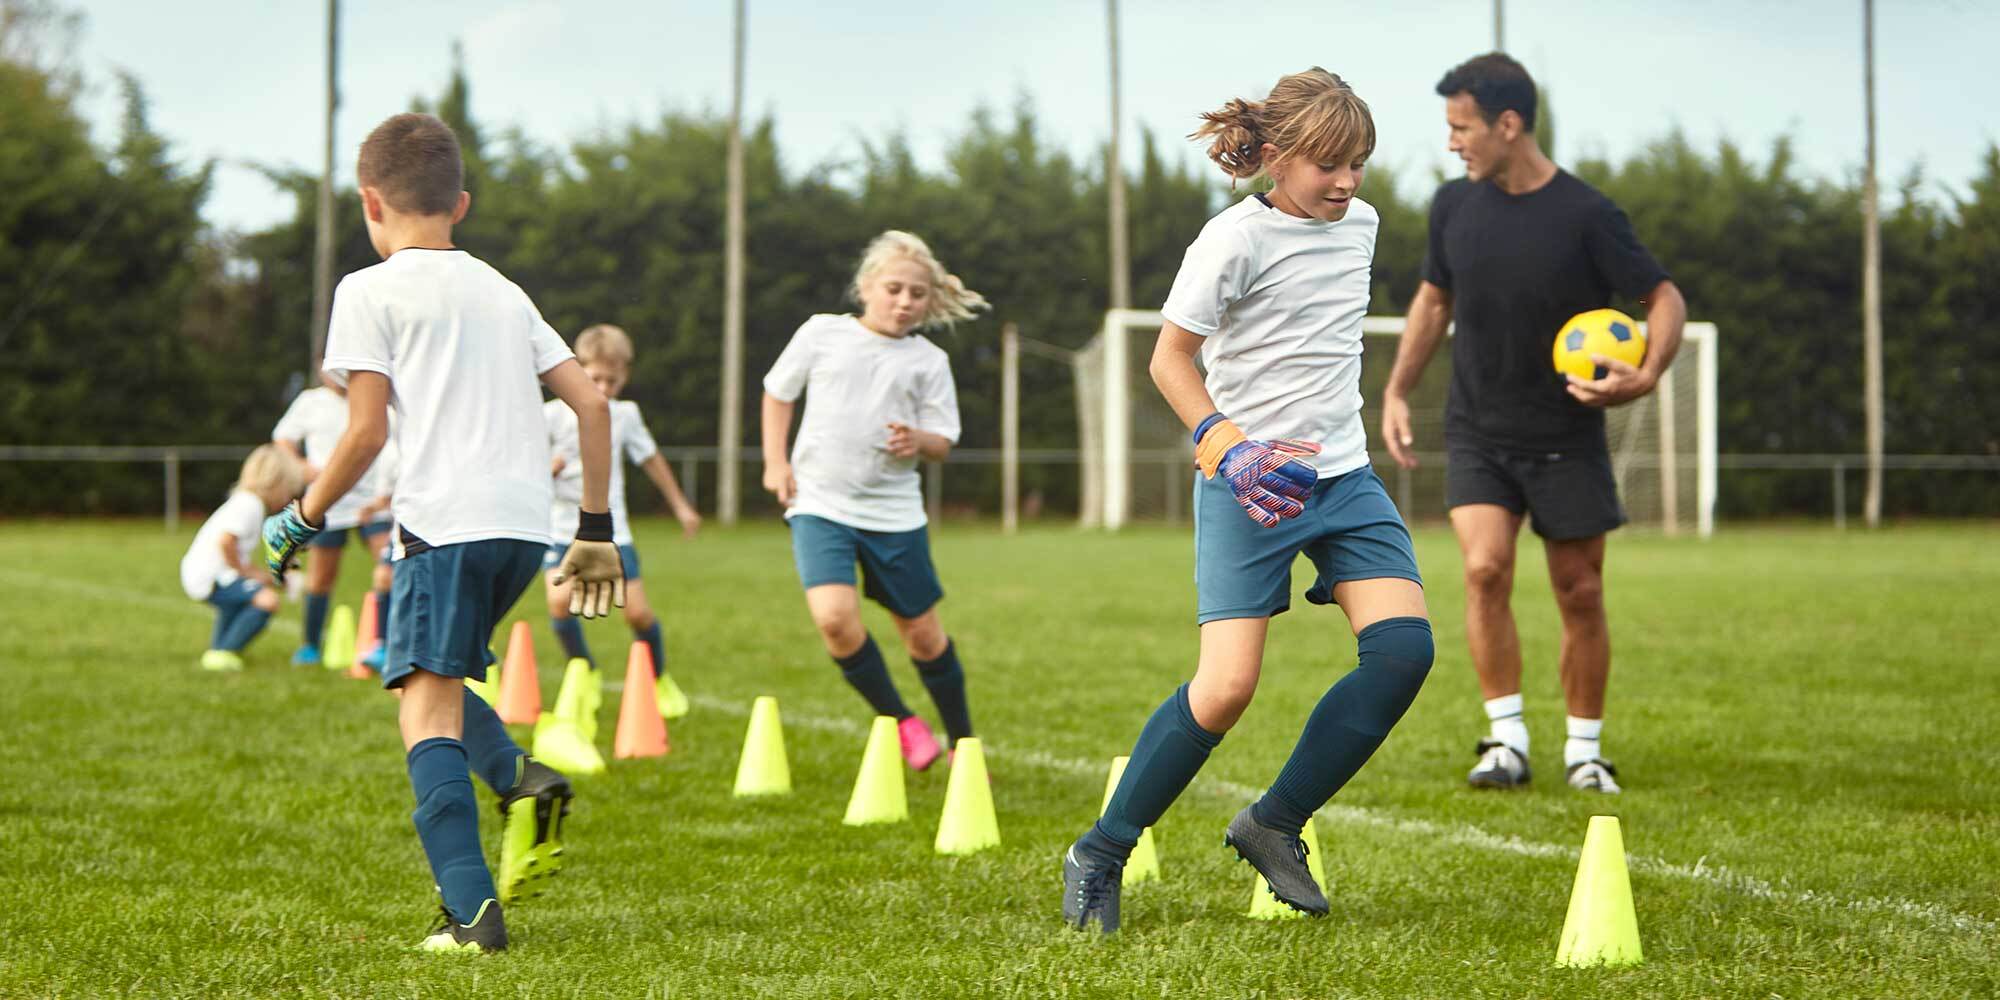 20-facts-about-physical-education-stats